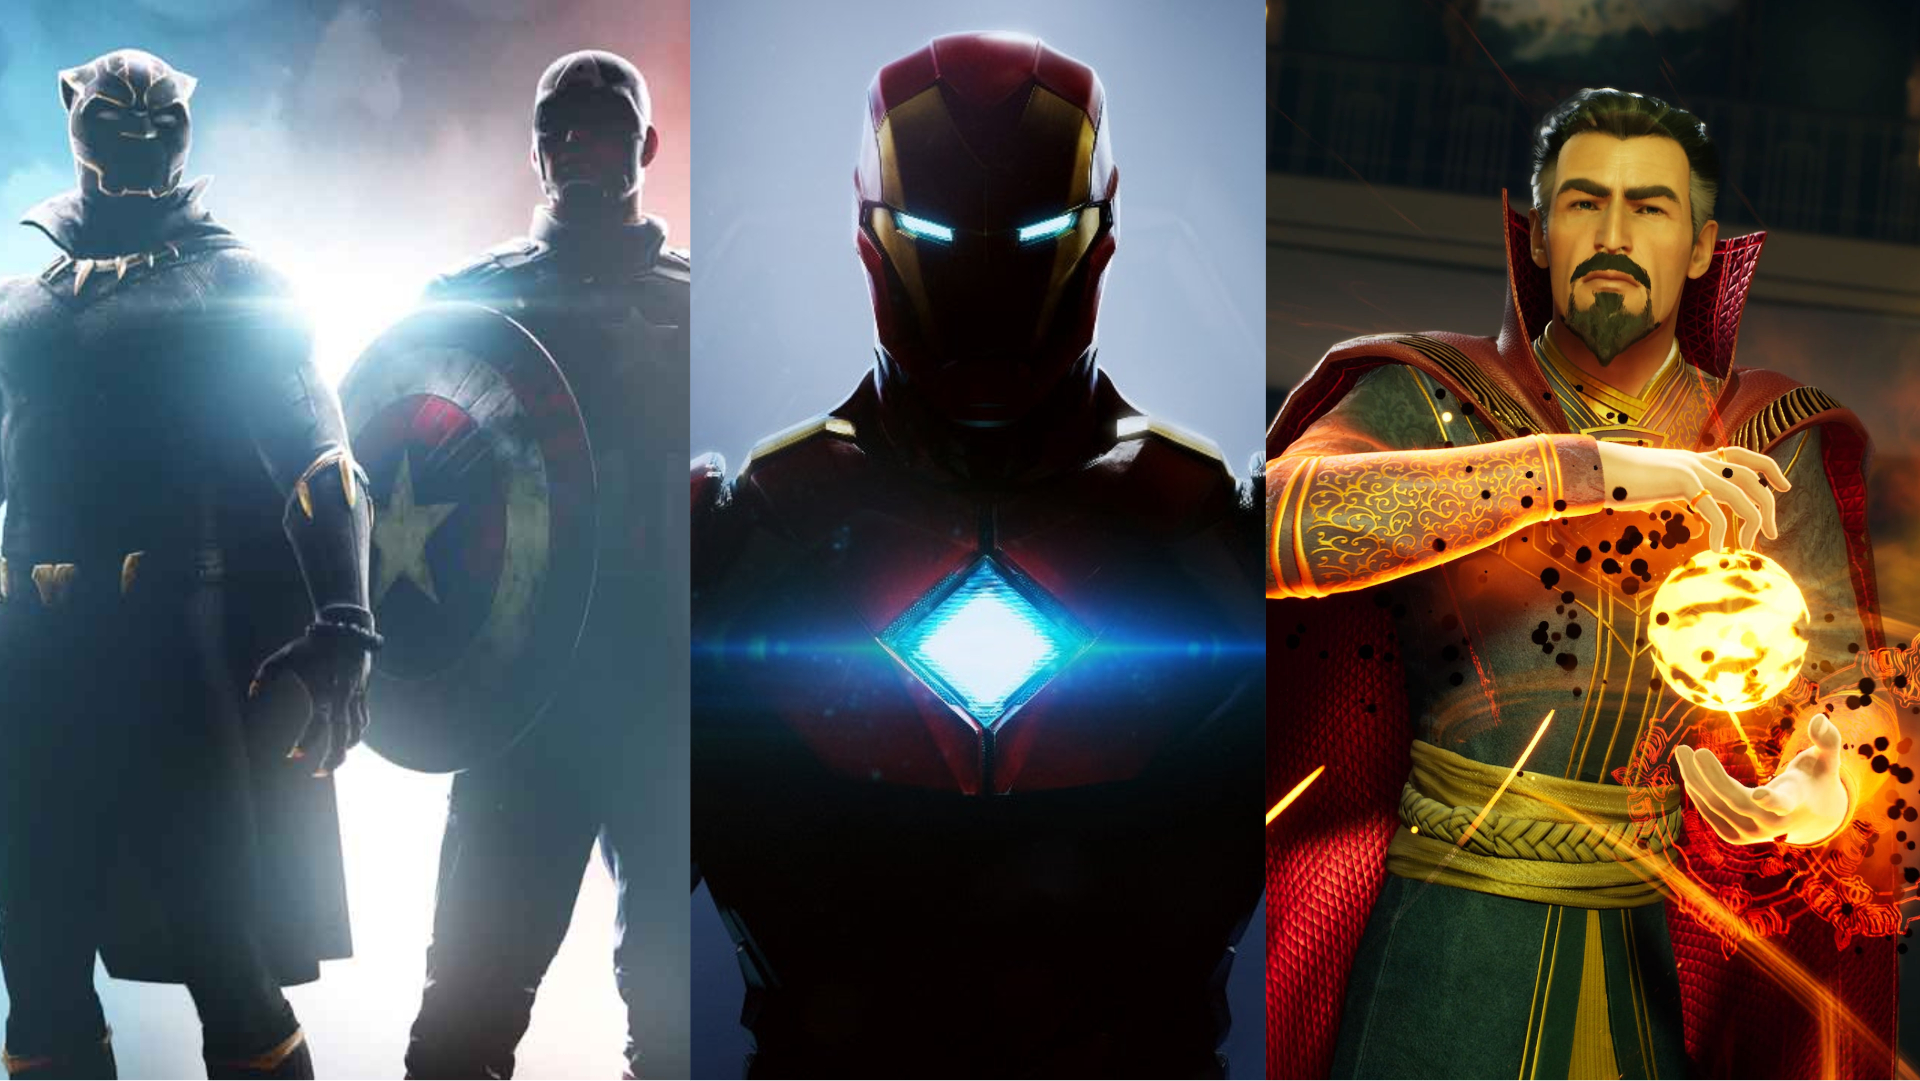 Marvel fans have a lot of PC games to look forward to